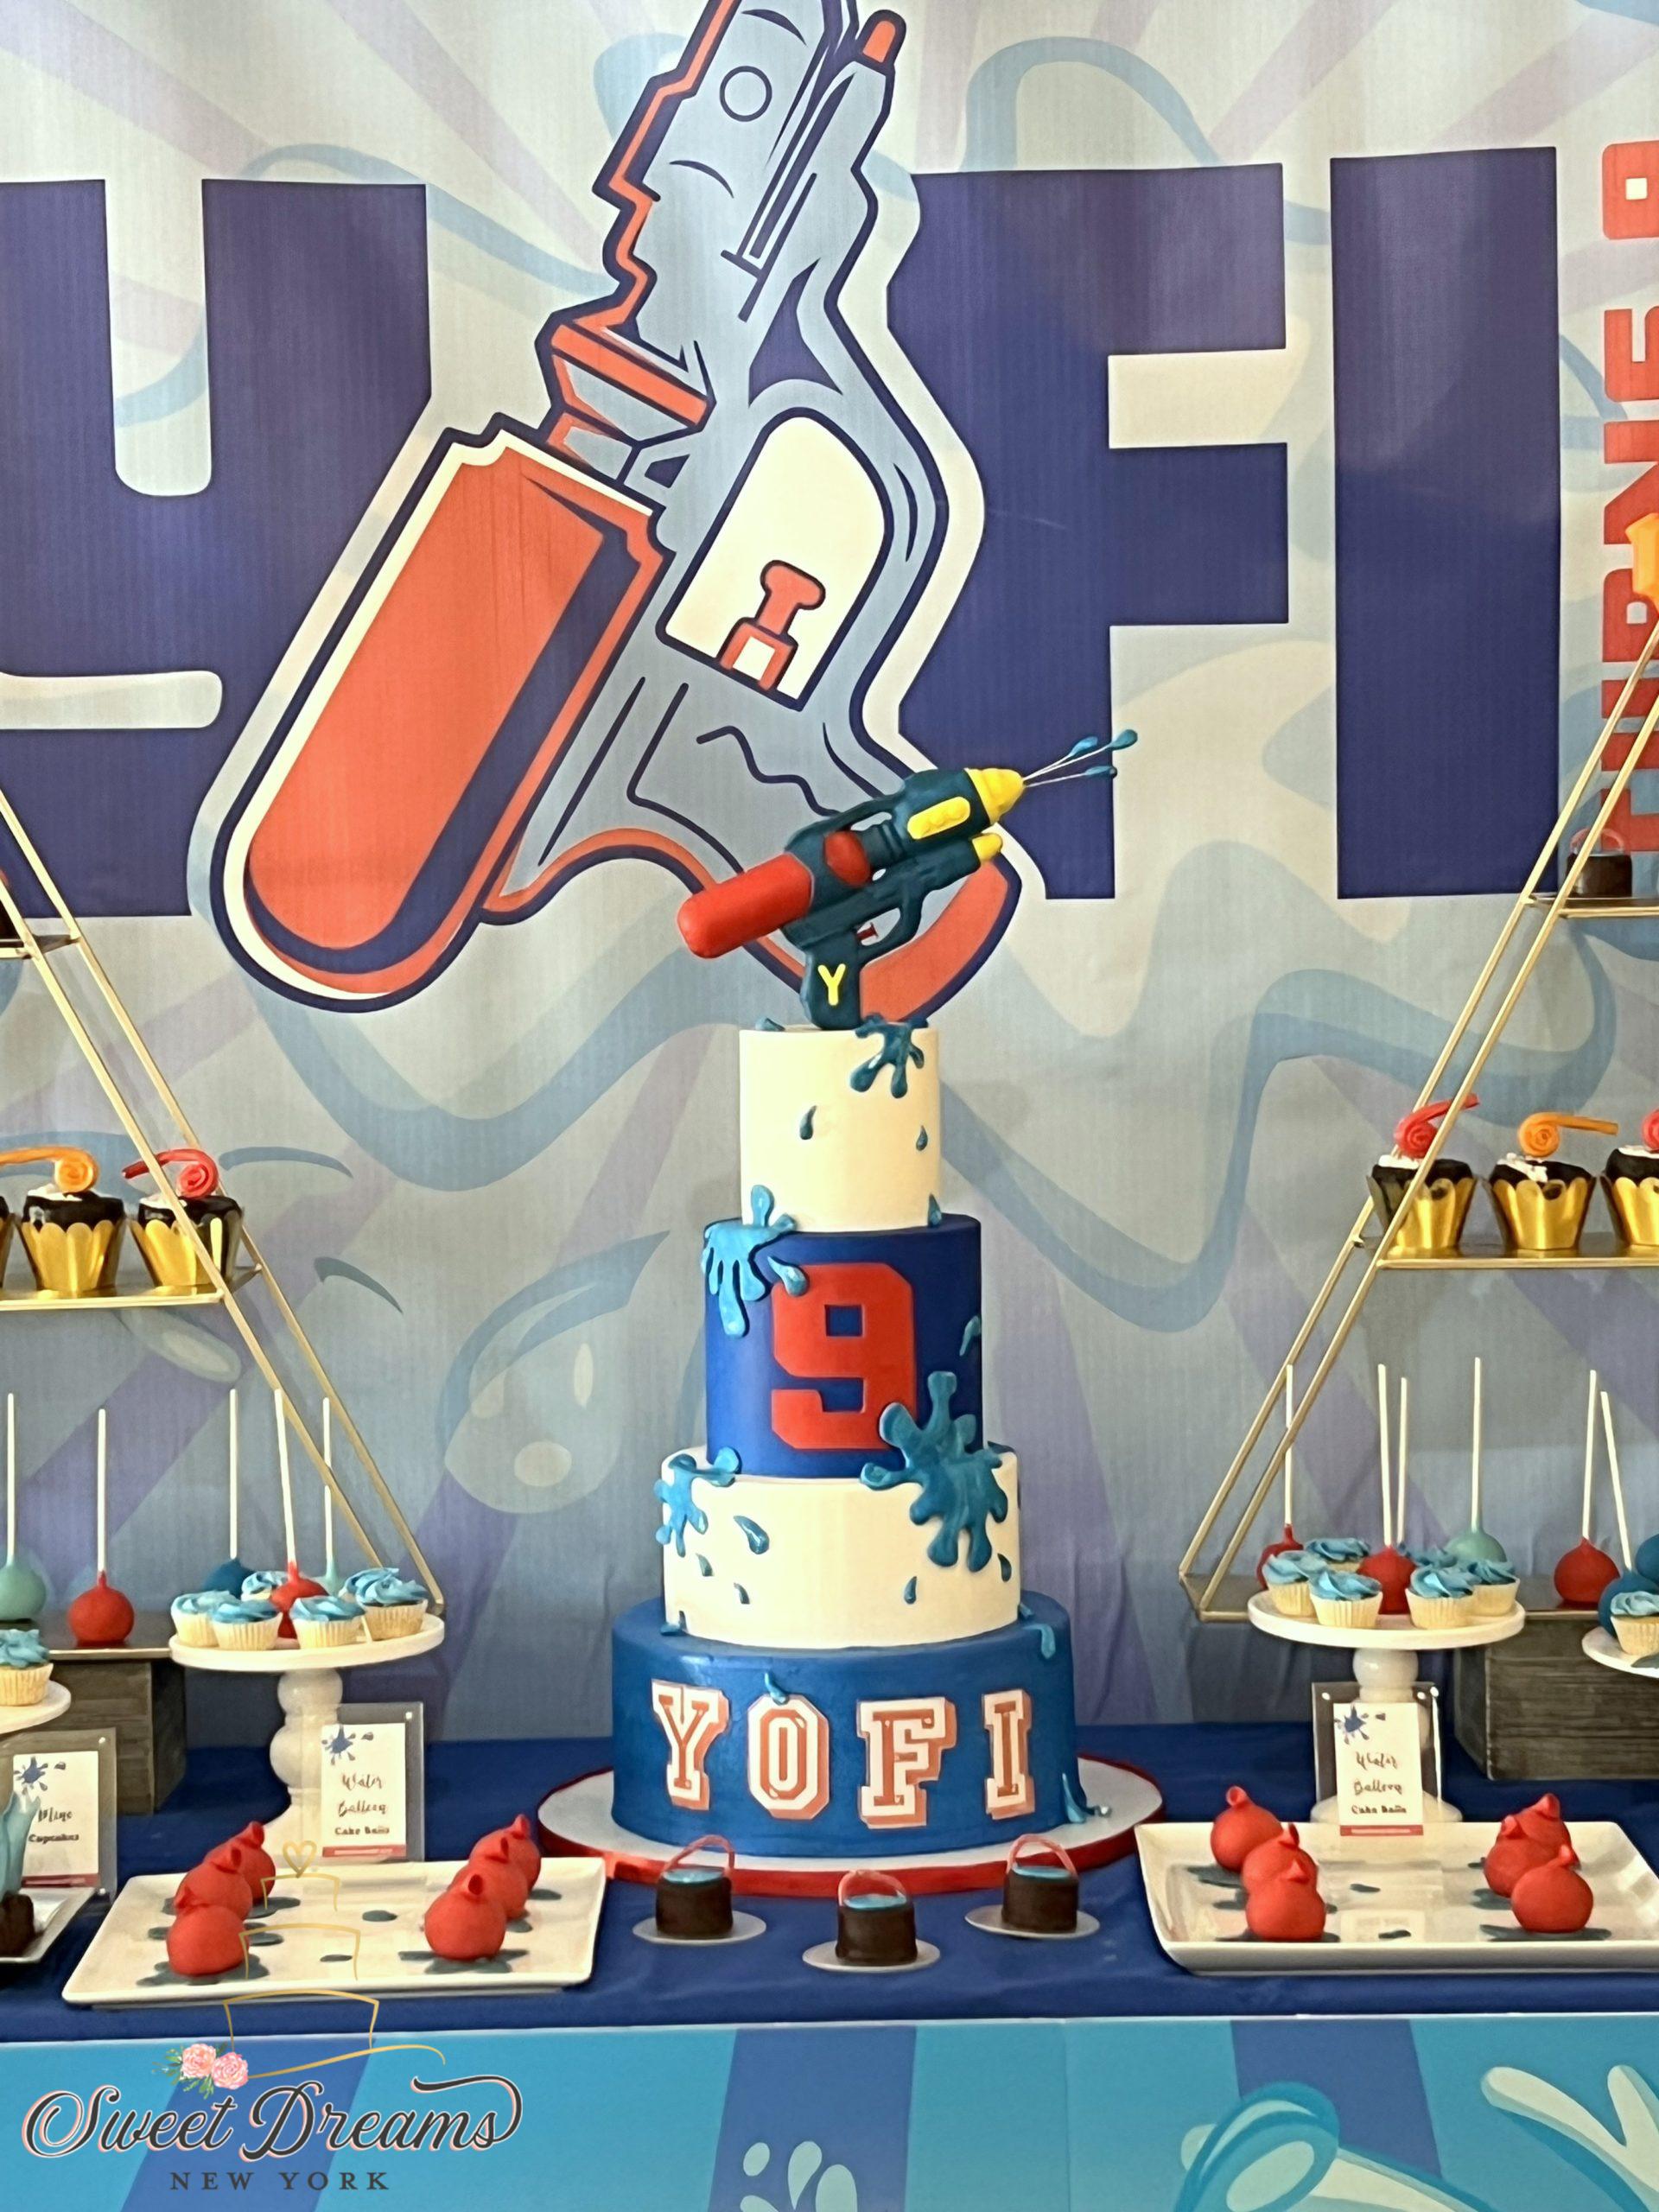 Ninth 9th birthday cake and desserts specialty cakes and desserts tables Long Island NY NYC